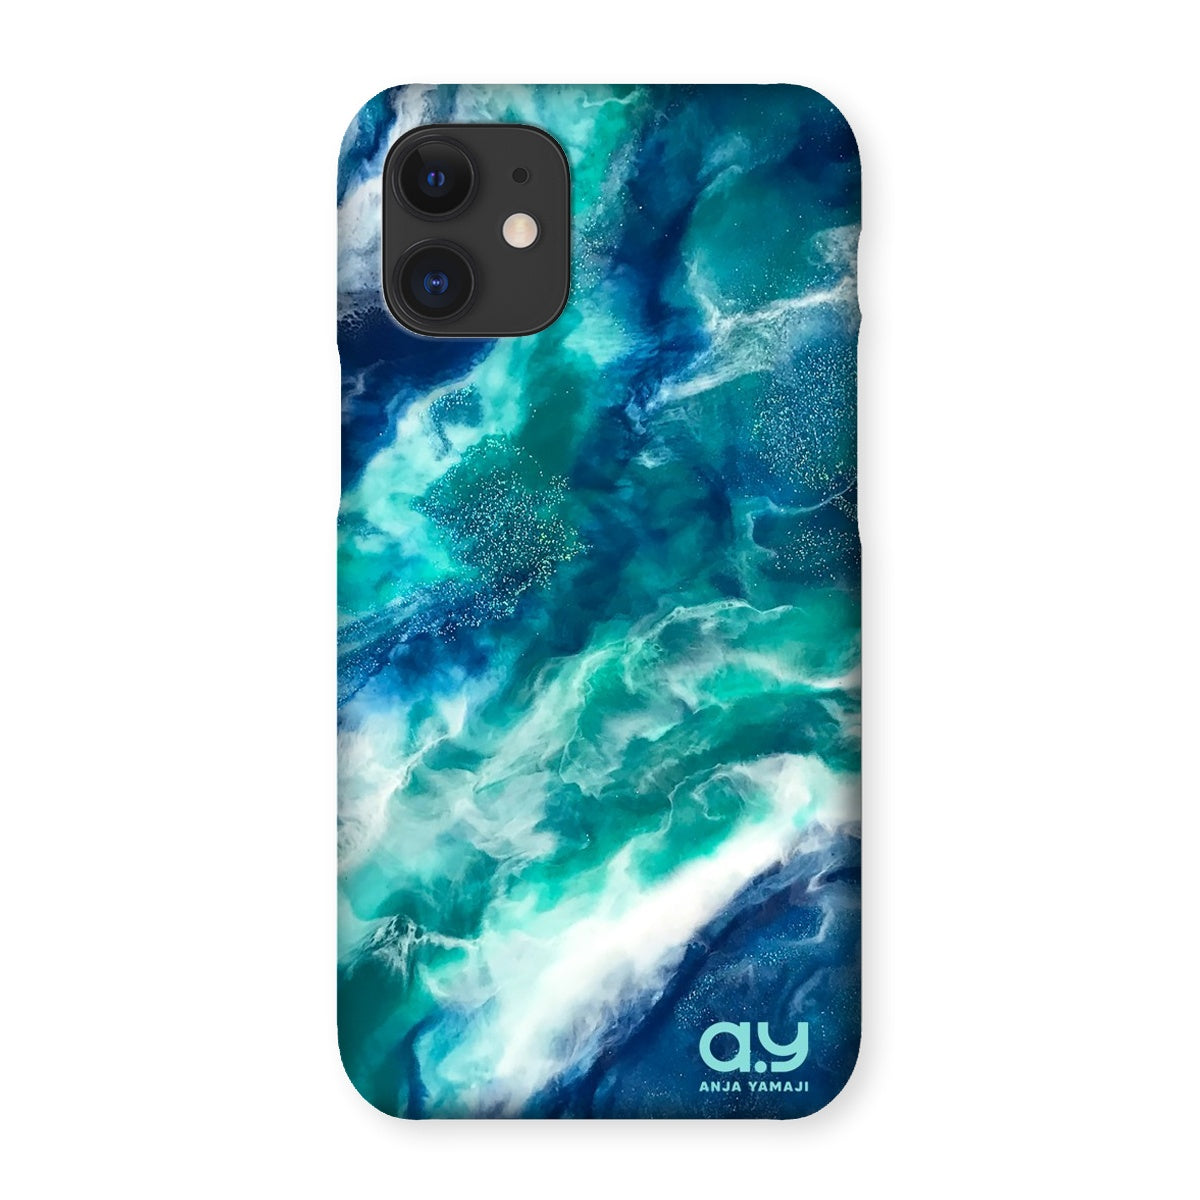 WATER Phone Case